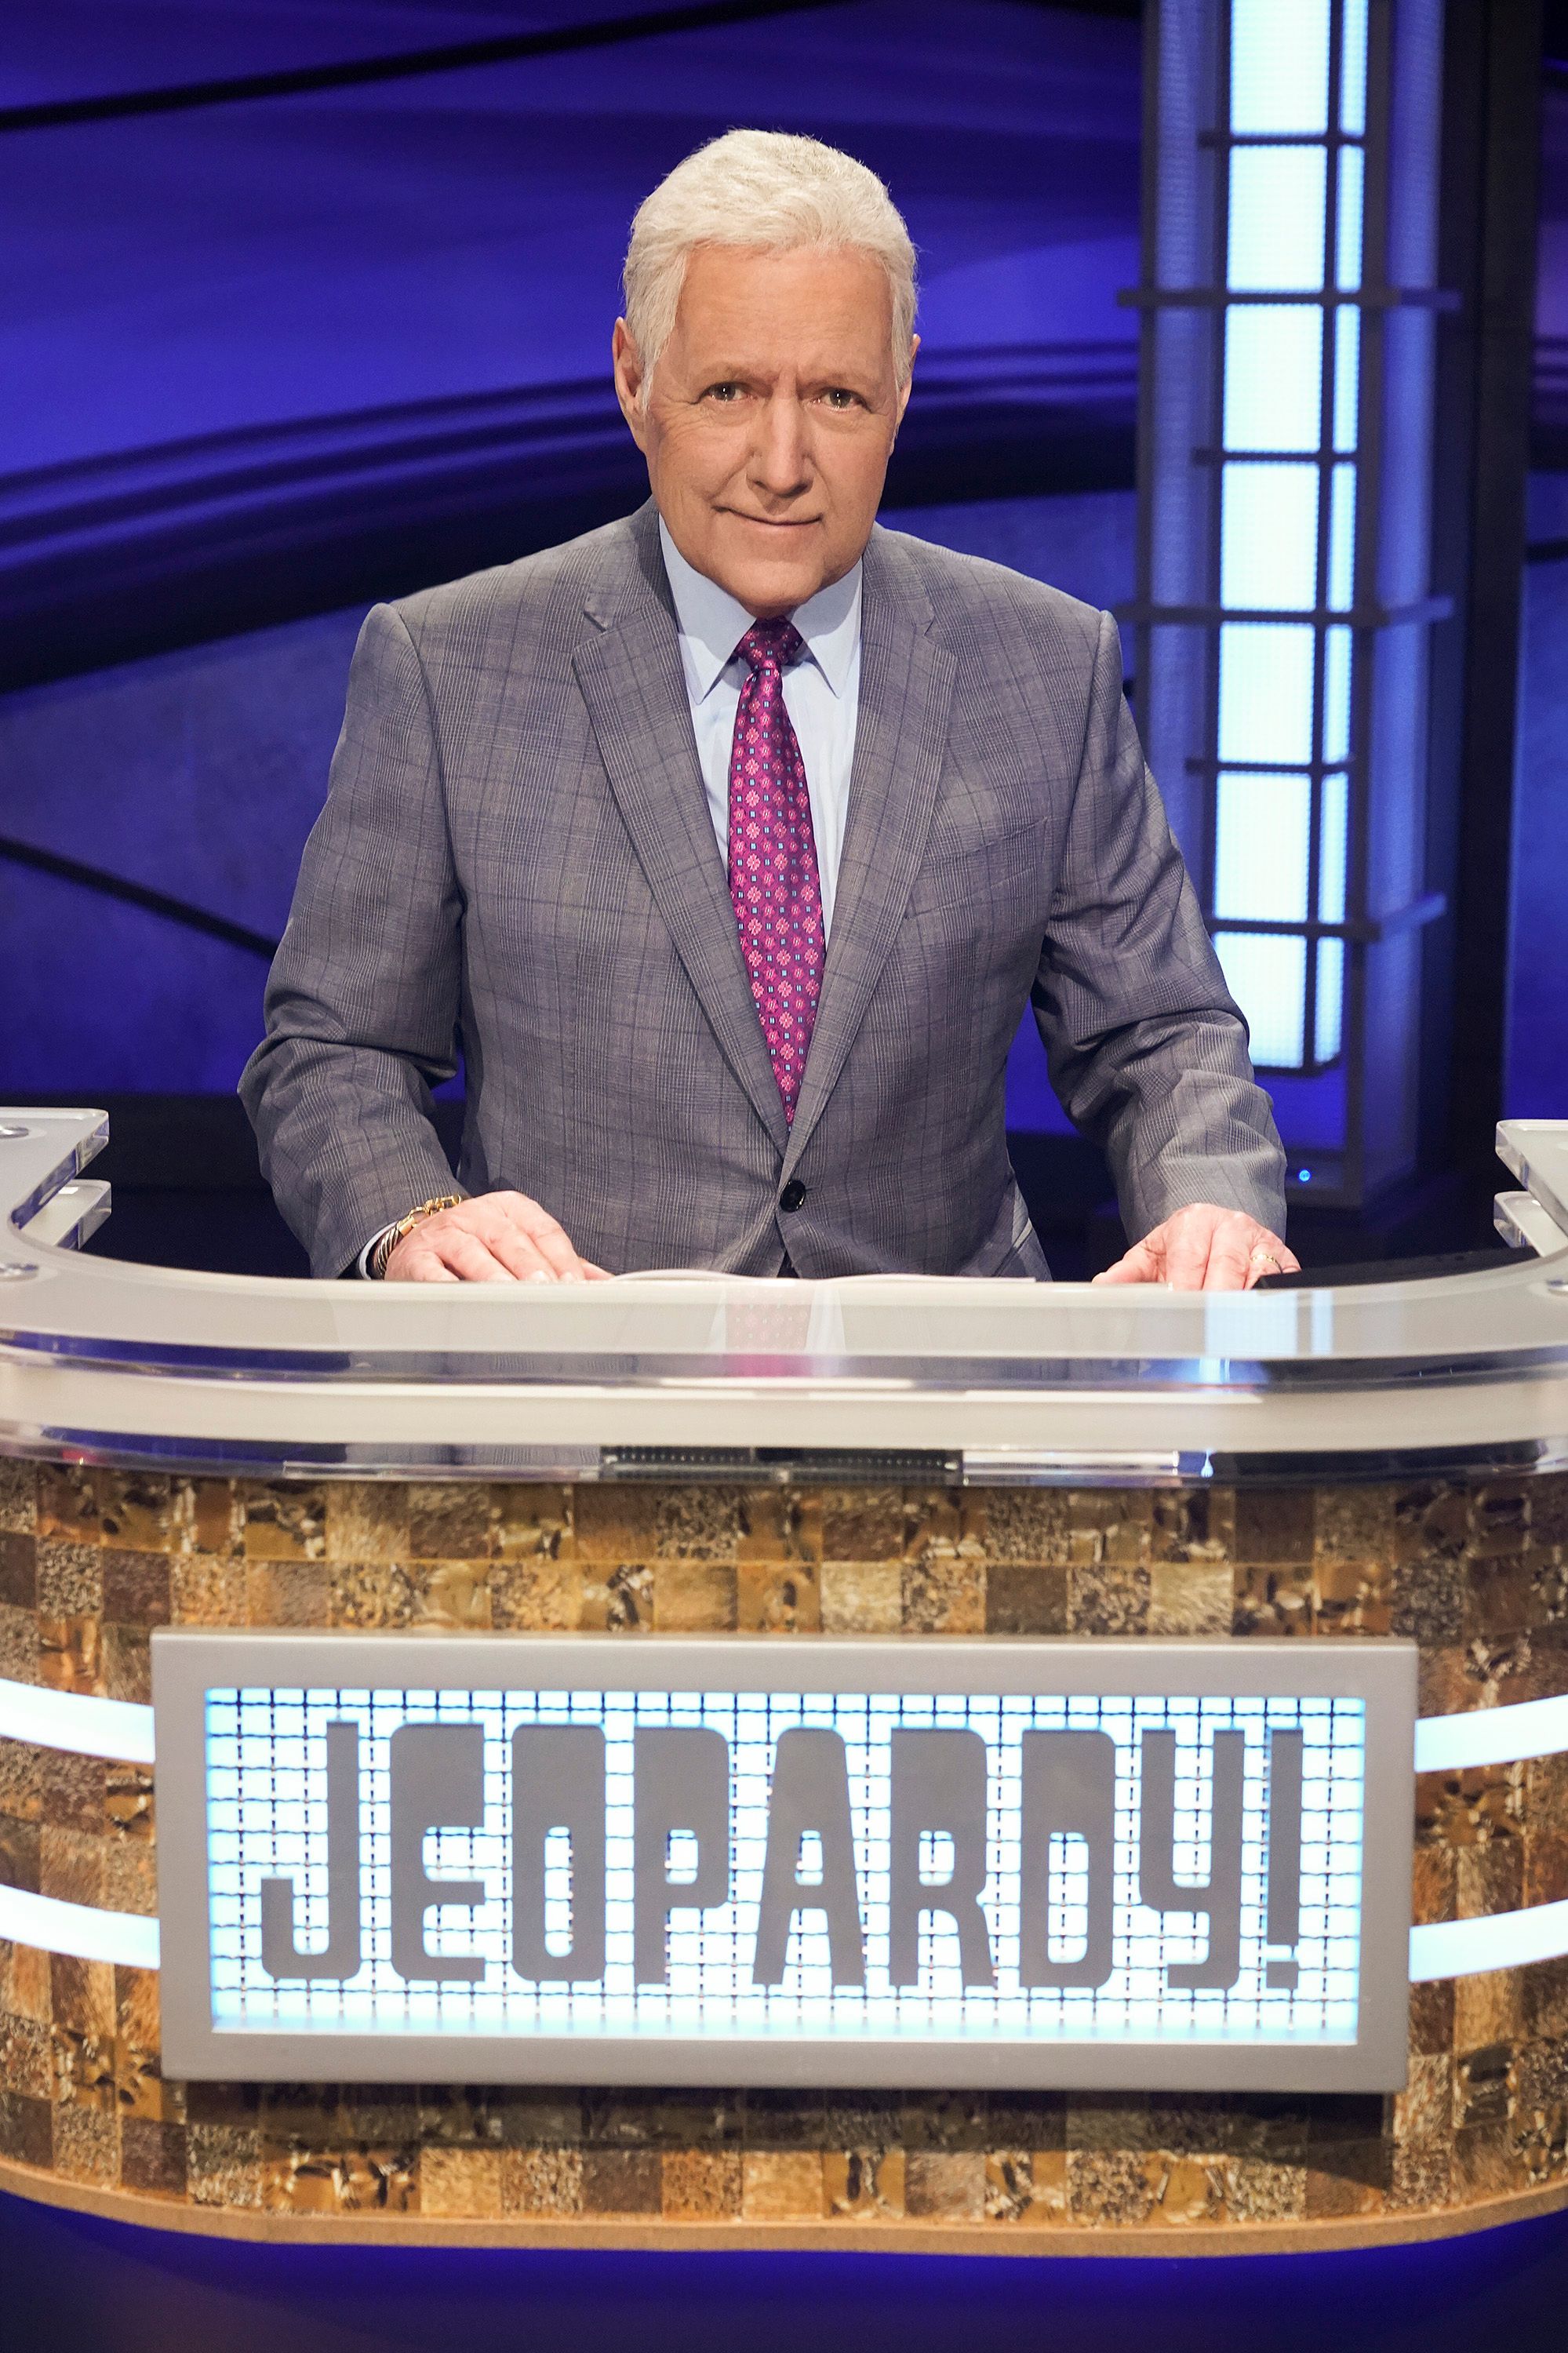 Alex Trebek hosting "Jeopardy! The Greatest of All Time" in January 2020 | Source: Getty Images